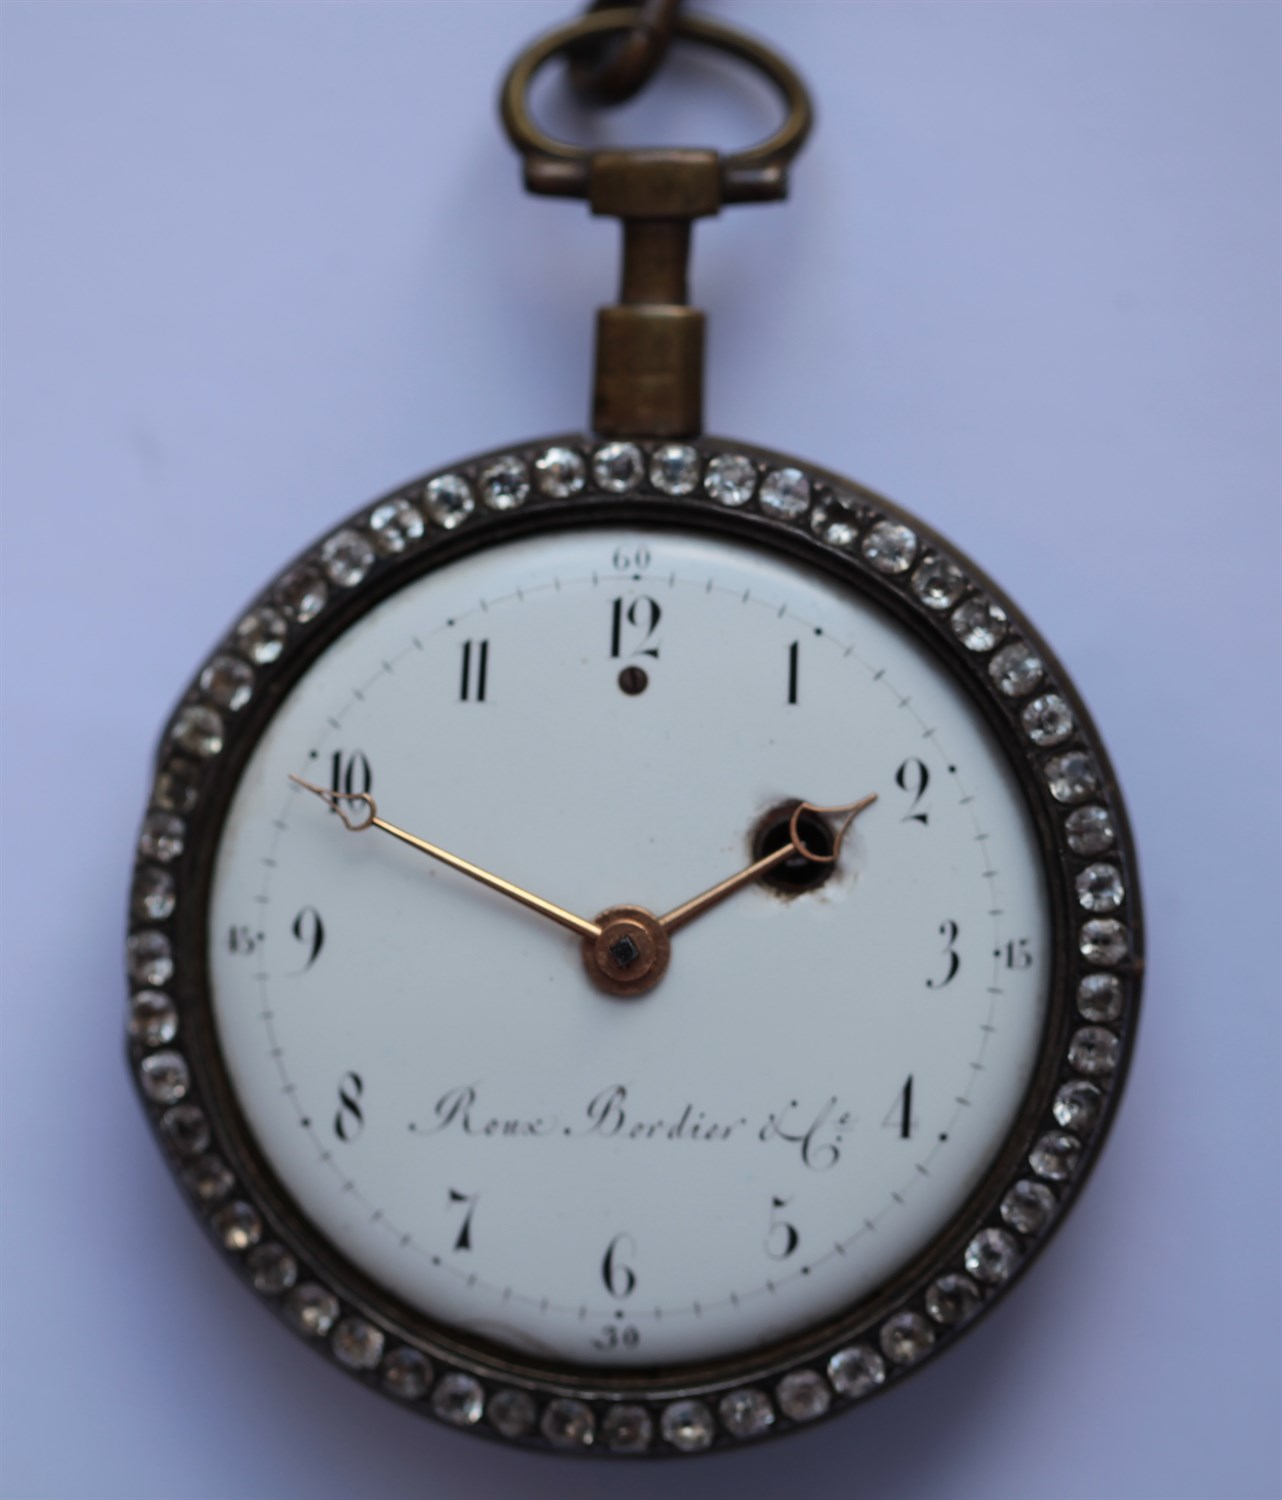 Lot 162 - ROUX BORDIER et Cie - a mid 19th century enamel cased open faced pocket watch with a chatelaine clip